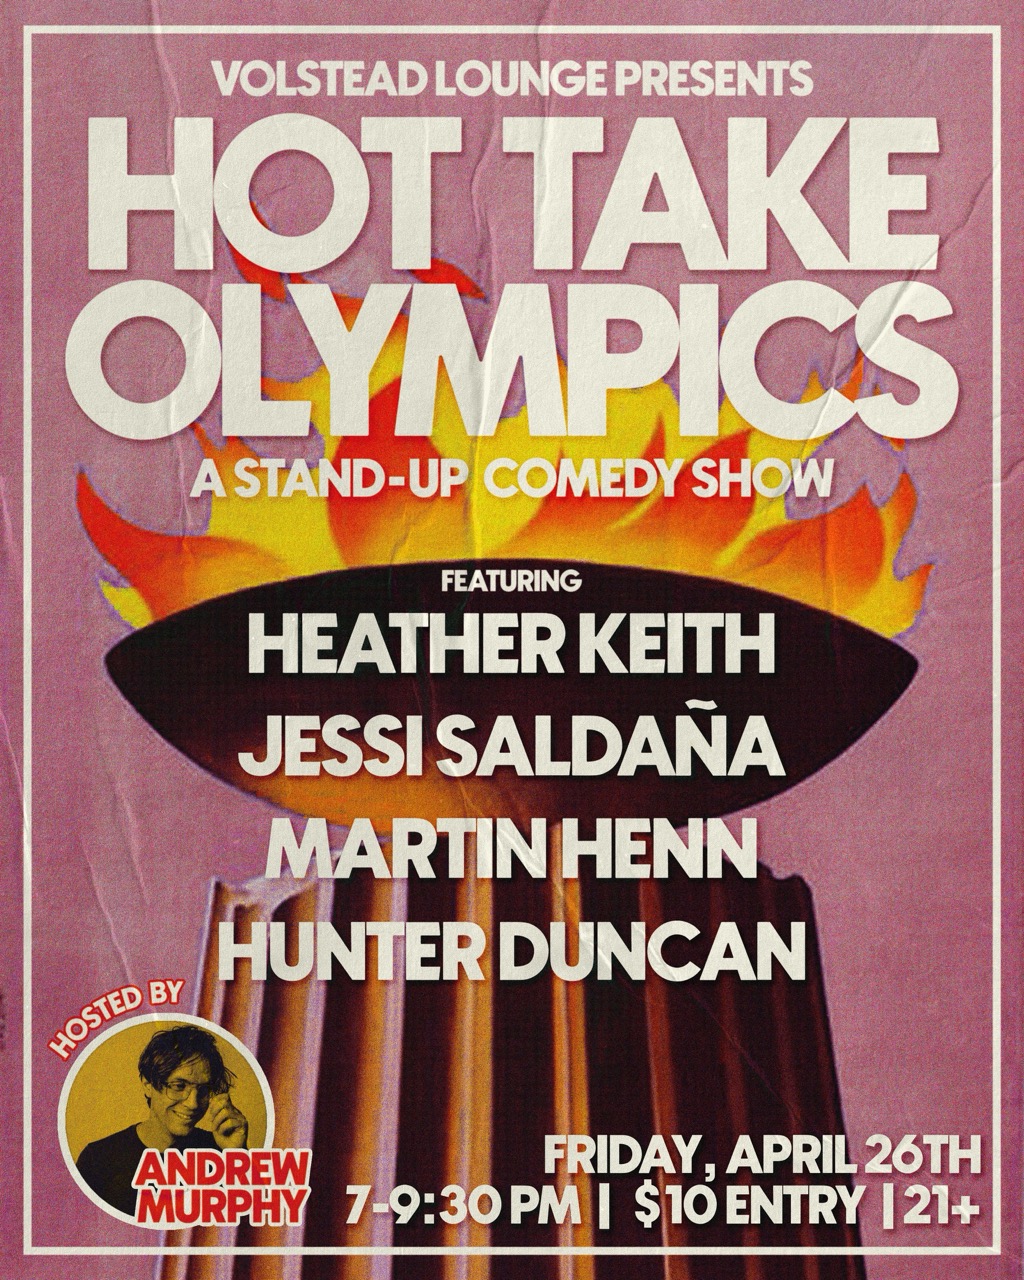 Hot Take Olympics: A Standup Comedy Show @ Volstead Lounge